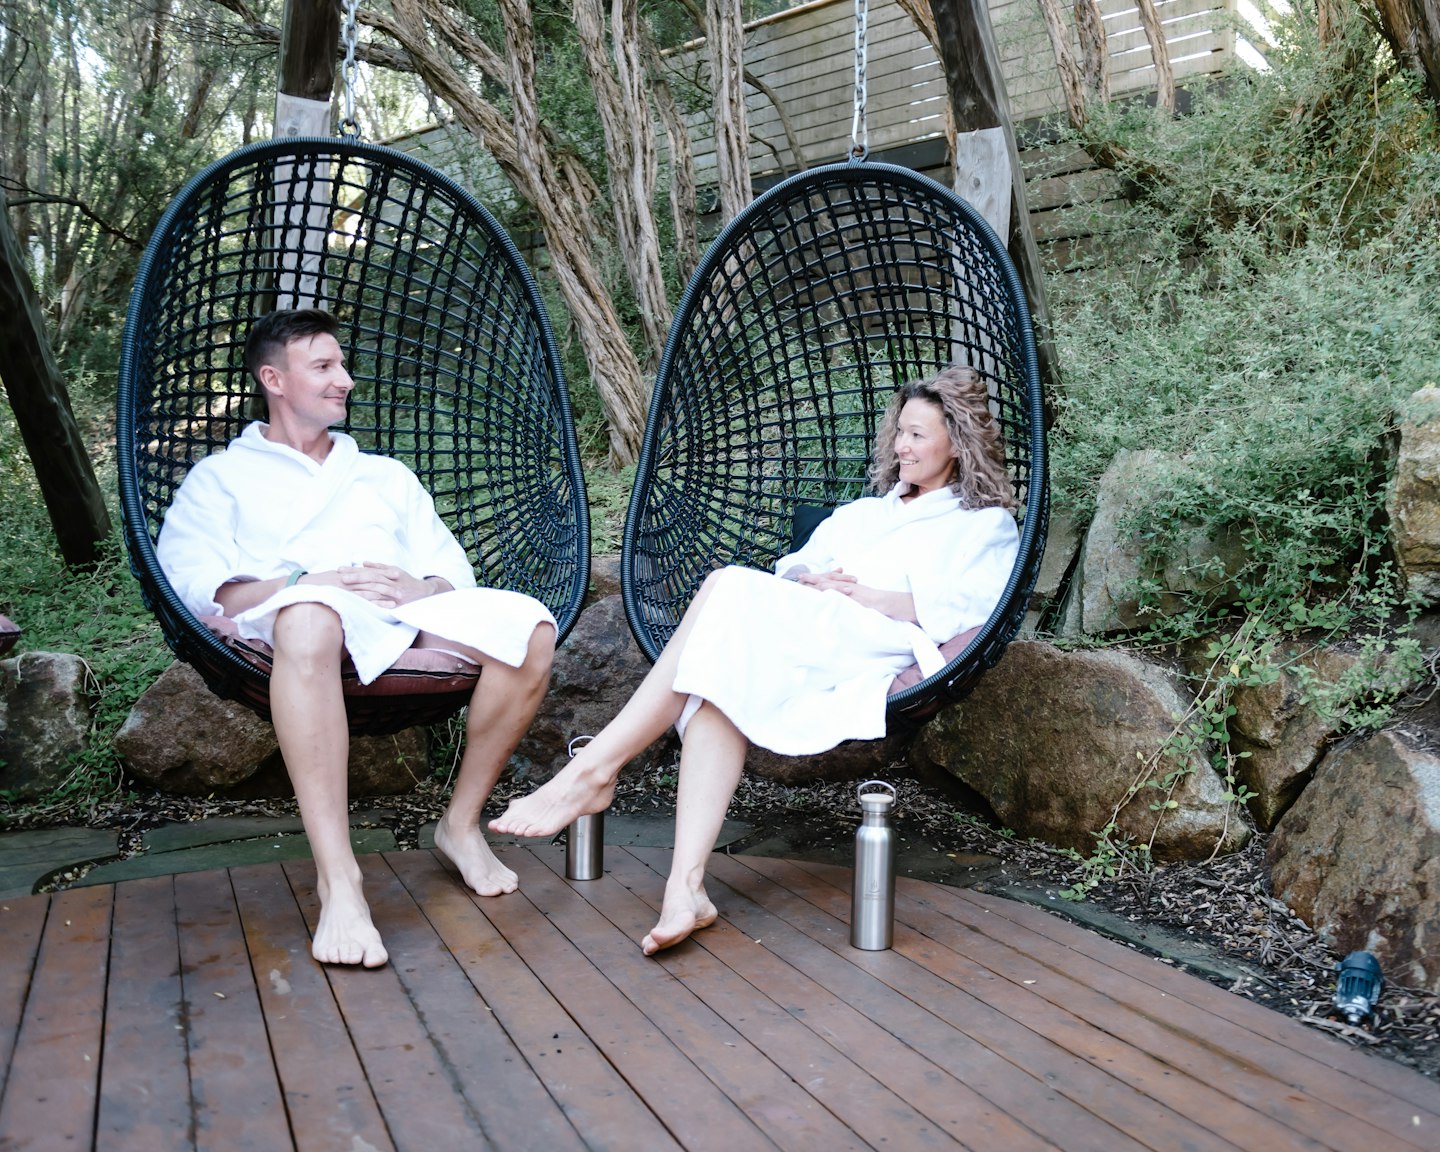 man and woman in white bath robes sit in hanging pod chairs in nature